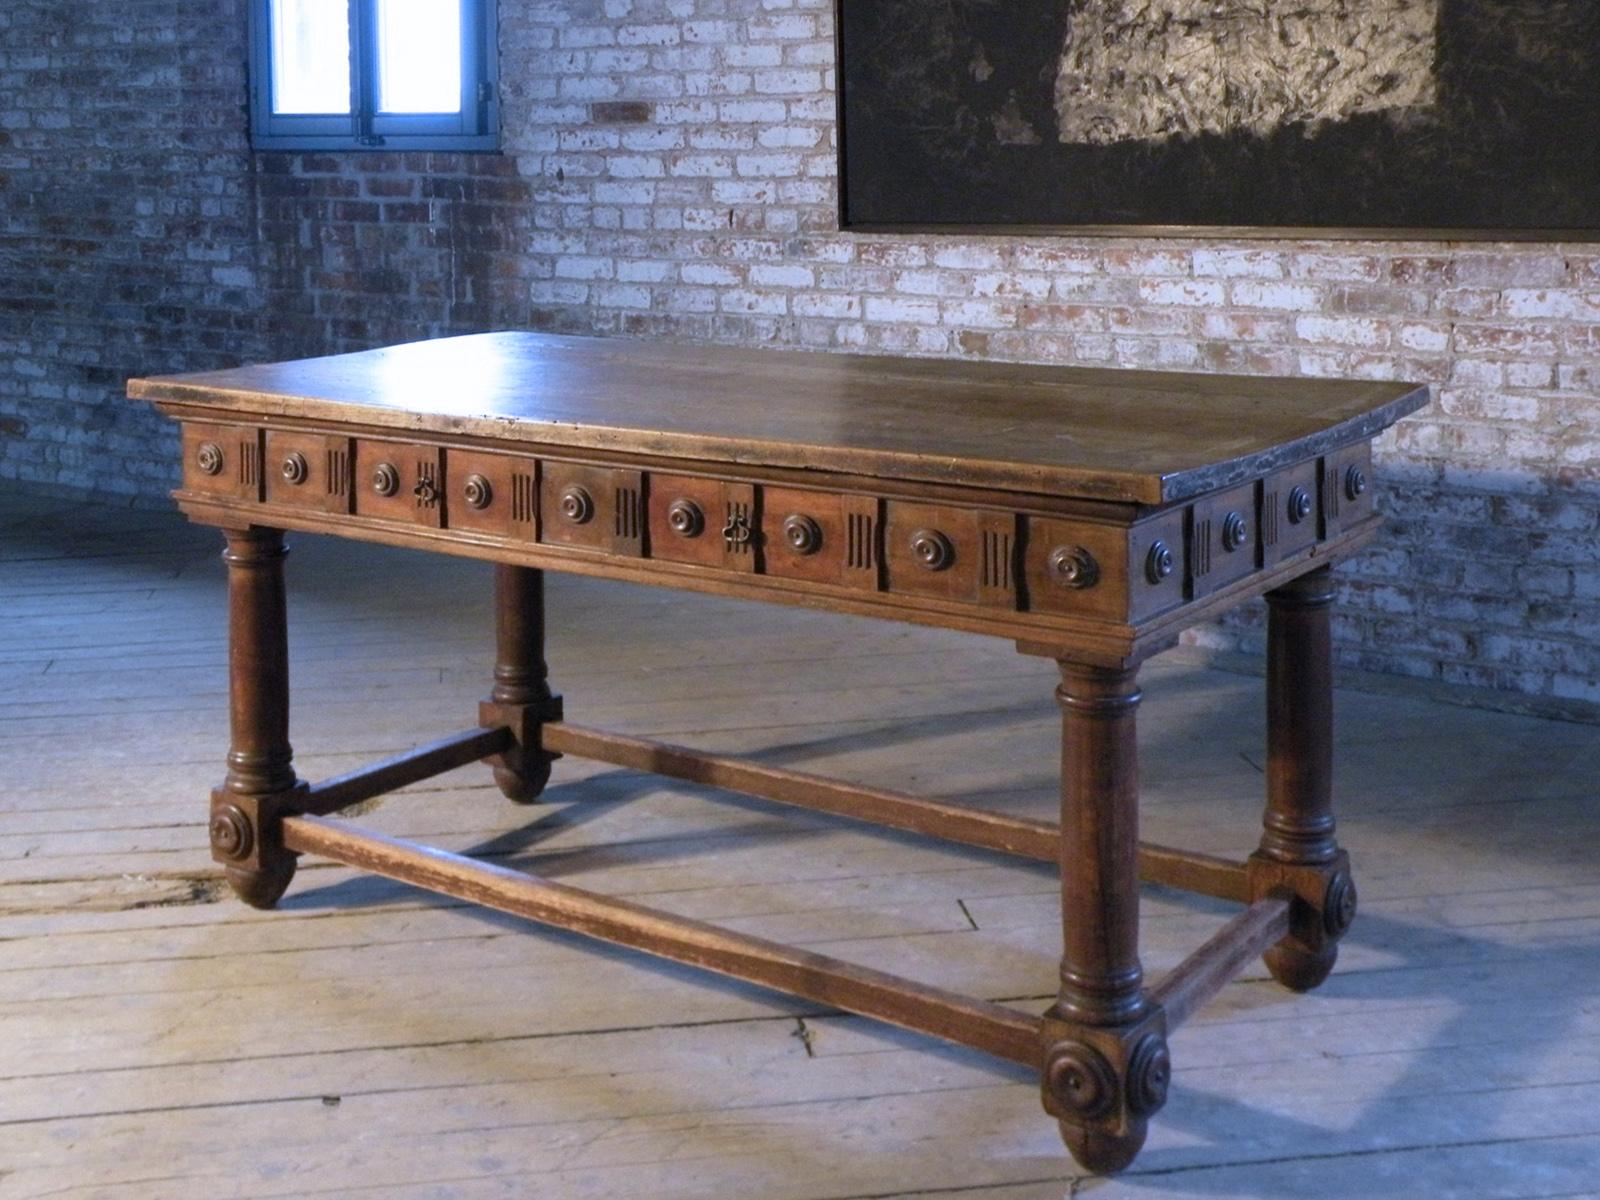 Italian (Bolognese) late 16th century center table or desk of late Renaissance /early Baroque Form, the rectangular top above a frieze decorated with turned roundels all around and containing two drawers on one side, supported by four columnar legs